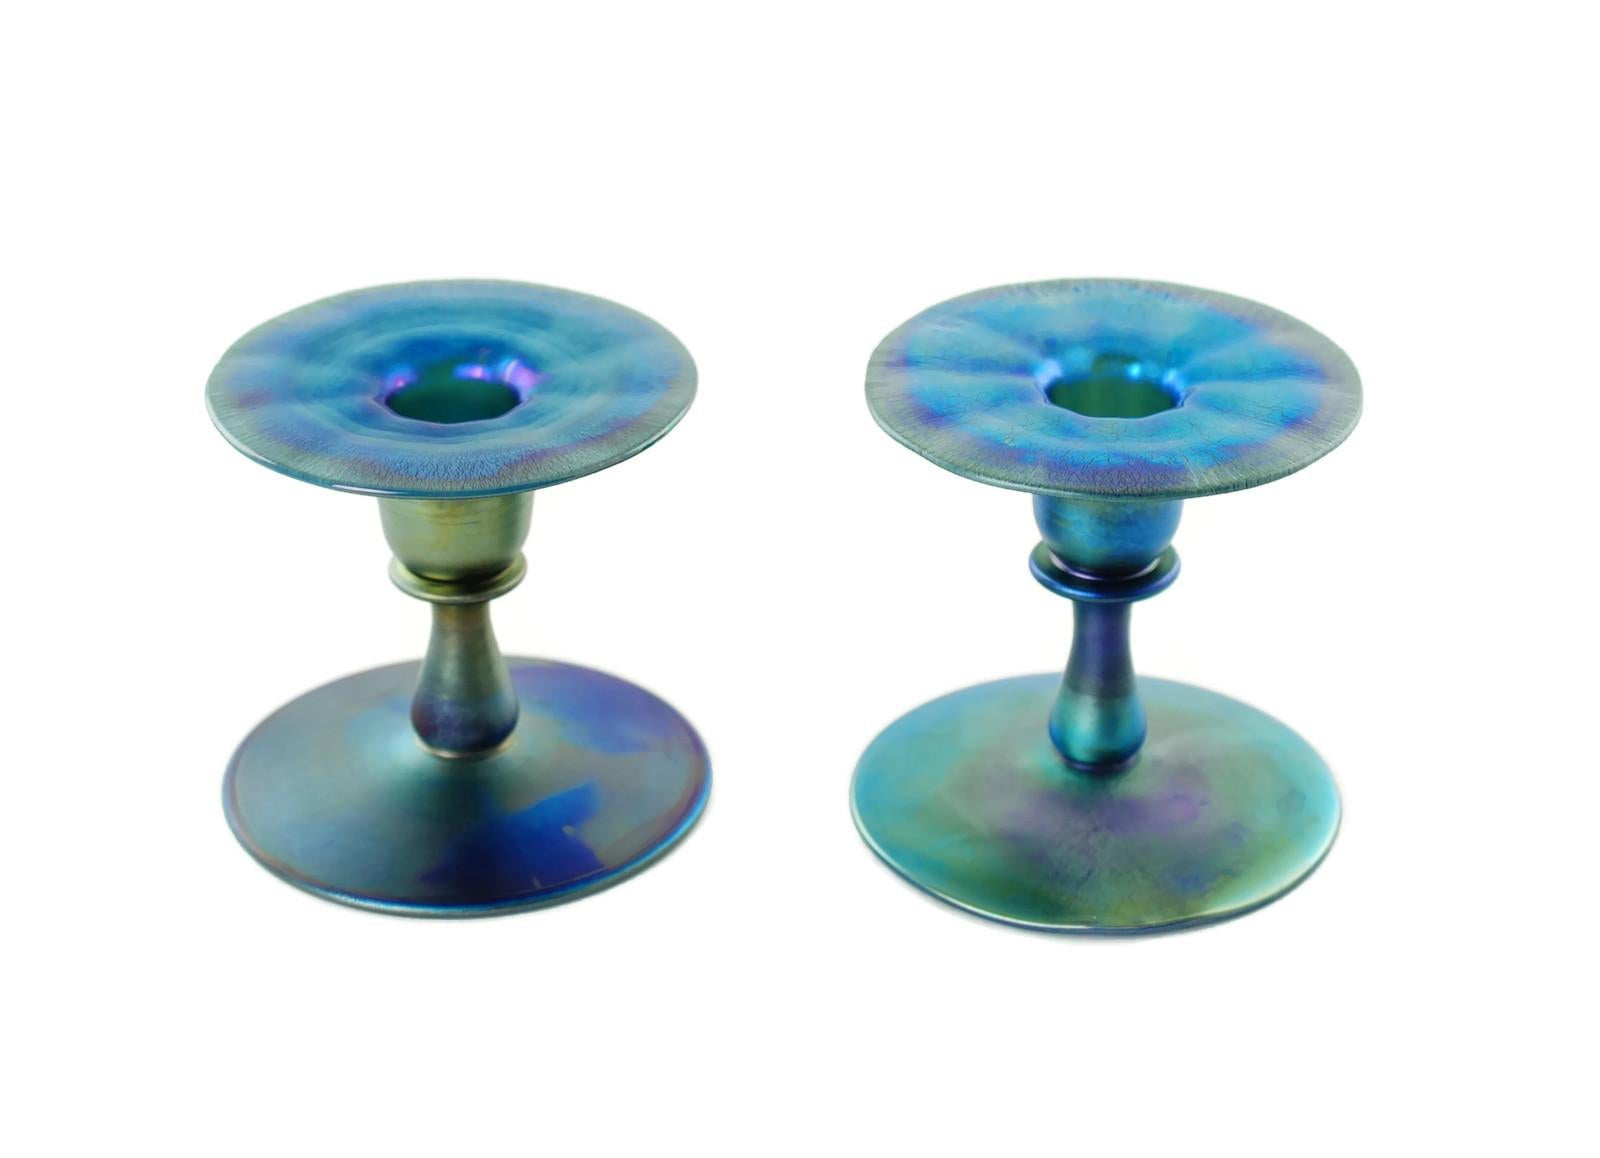 This matched pair of handcrafted Louis Comfort Tiffany single light candleholders have been made in the company's striking Blue Favrile art glass. The pieces have round pedestal bases with short baluster form stems. The stems are topped by candle